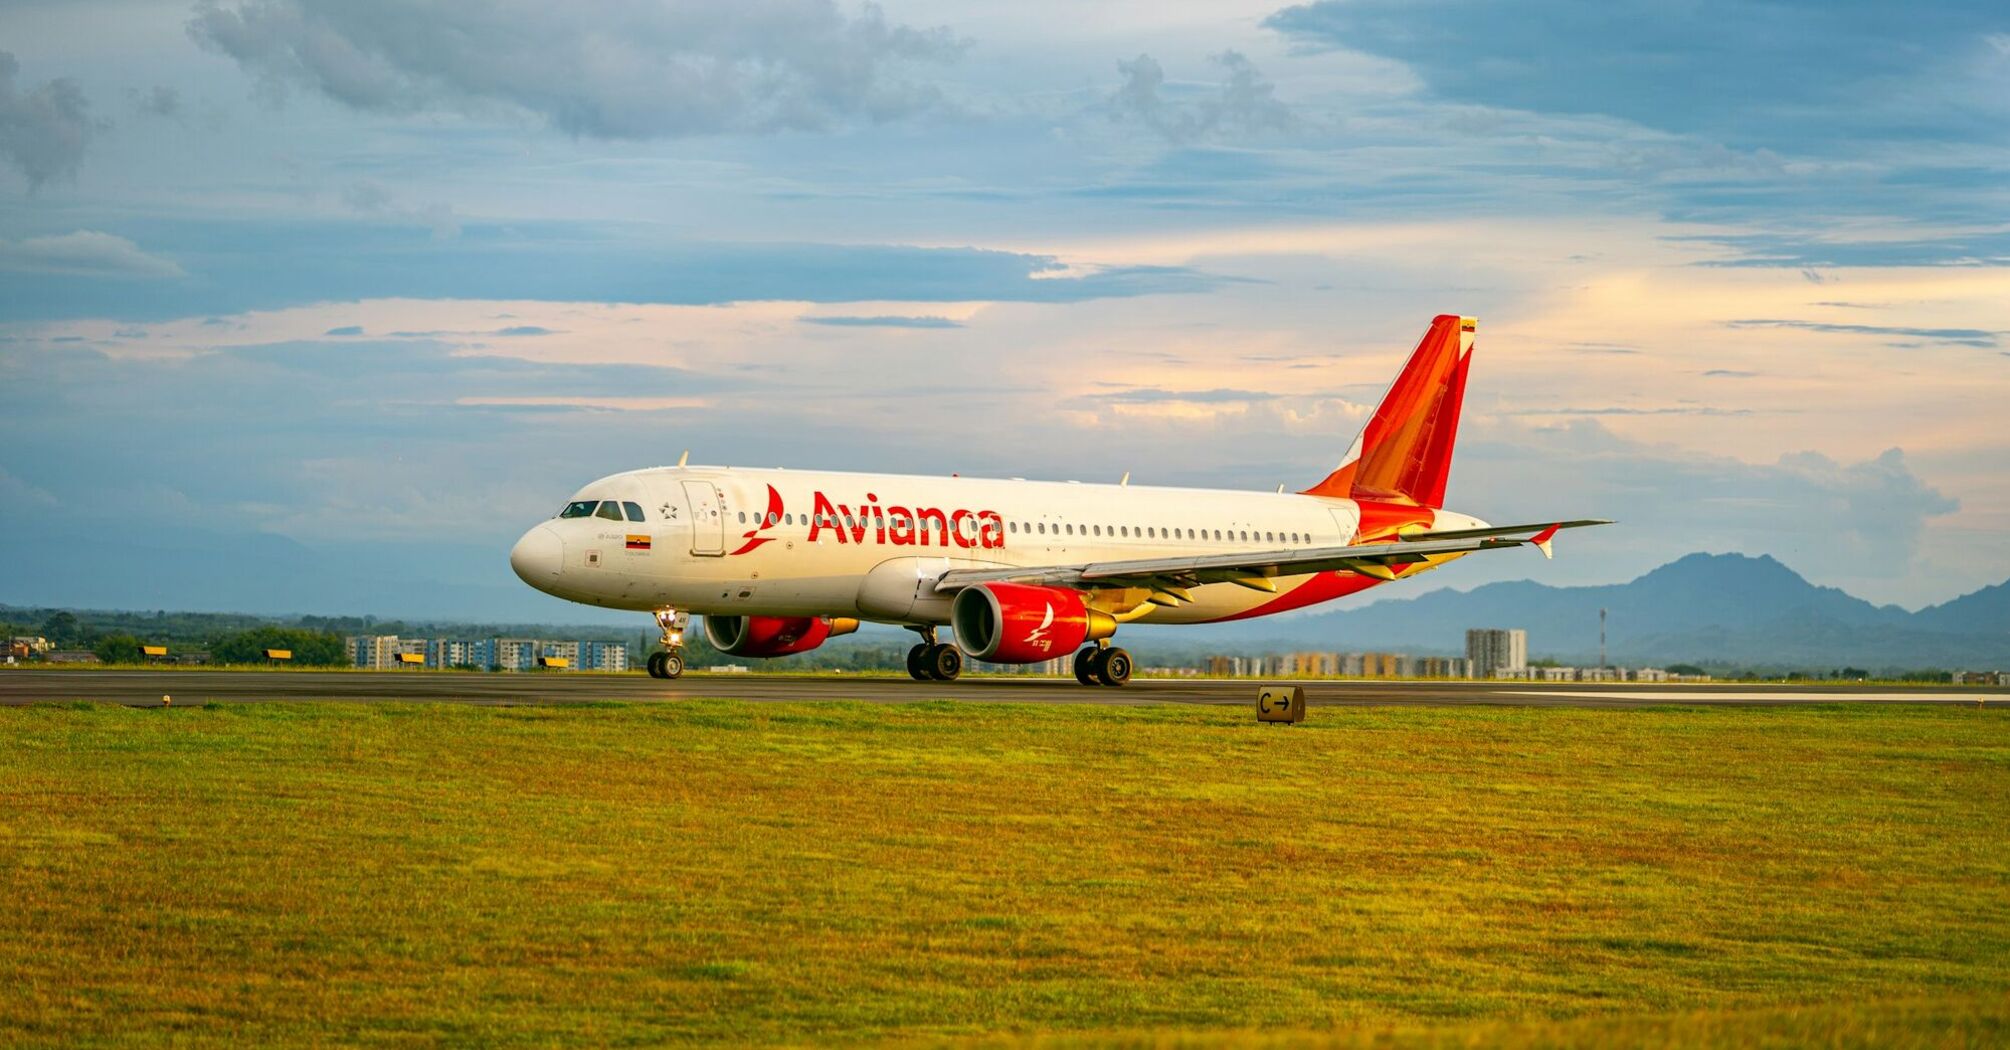 Avianca airplane on the runway at sunset